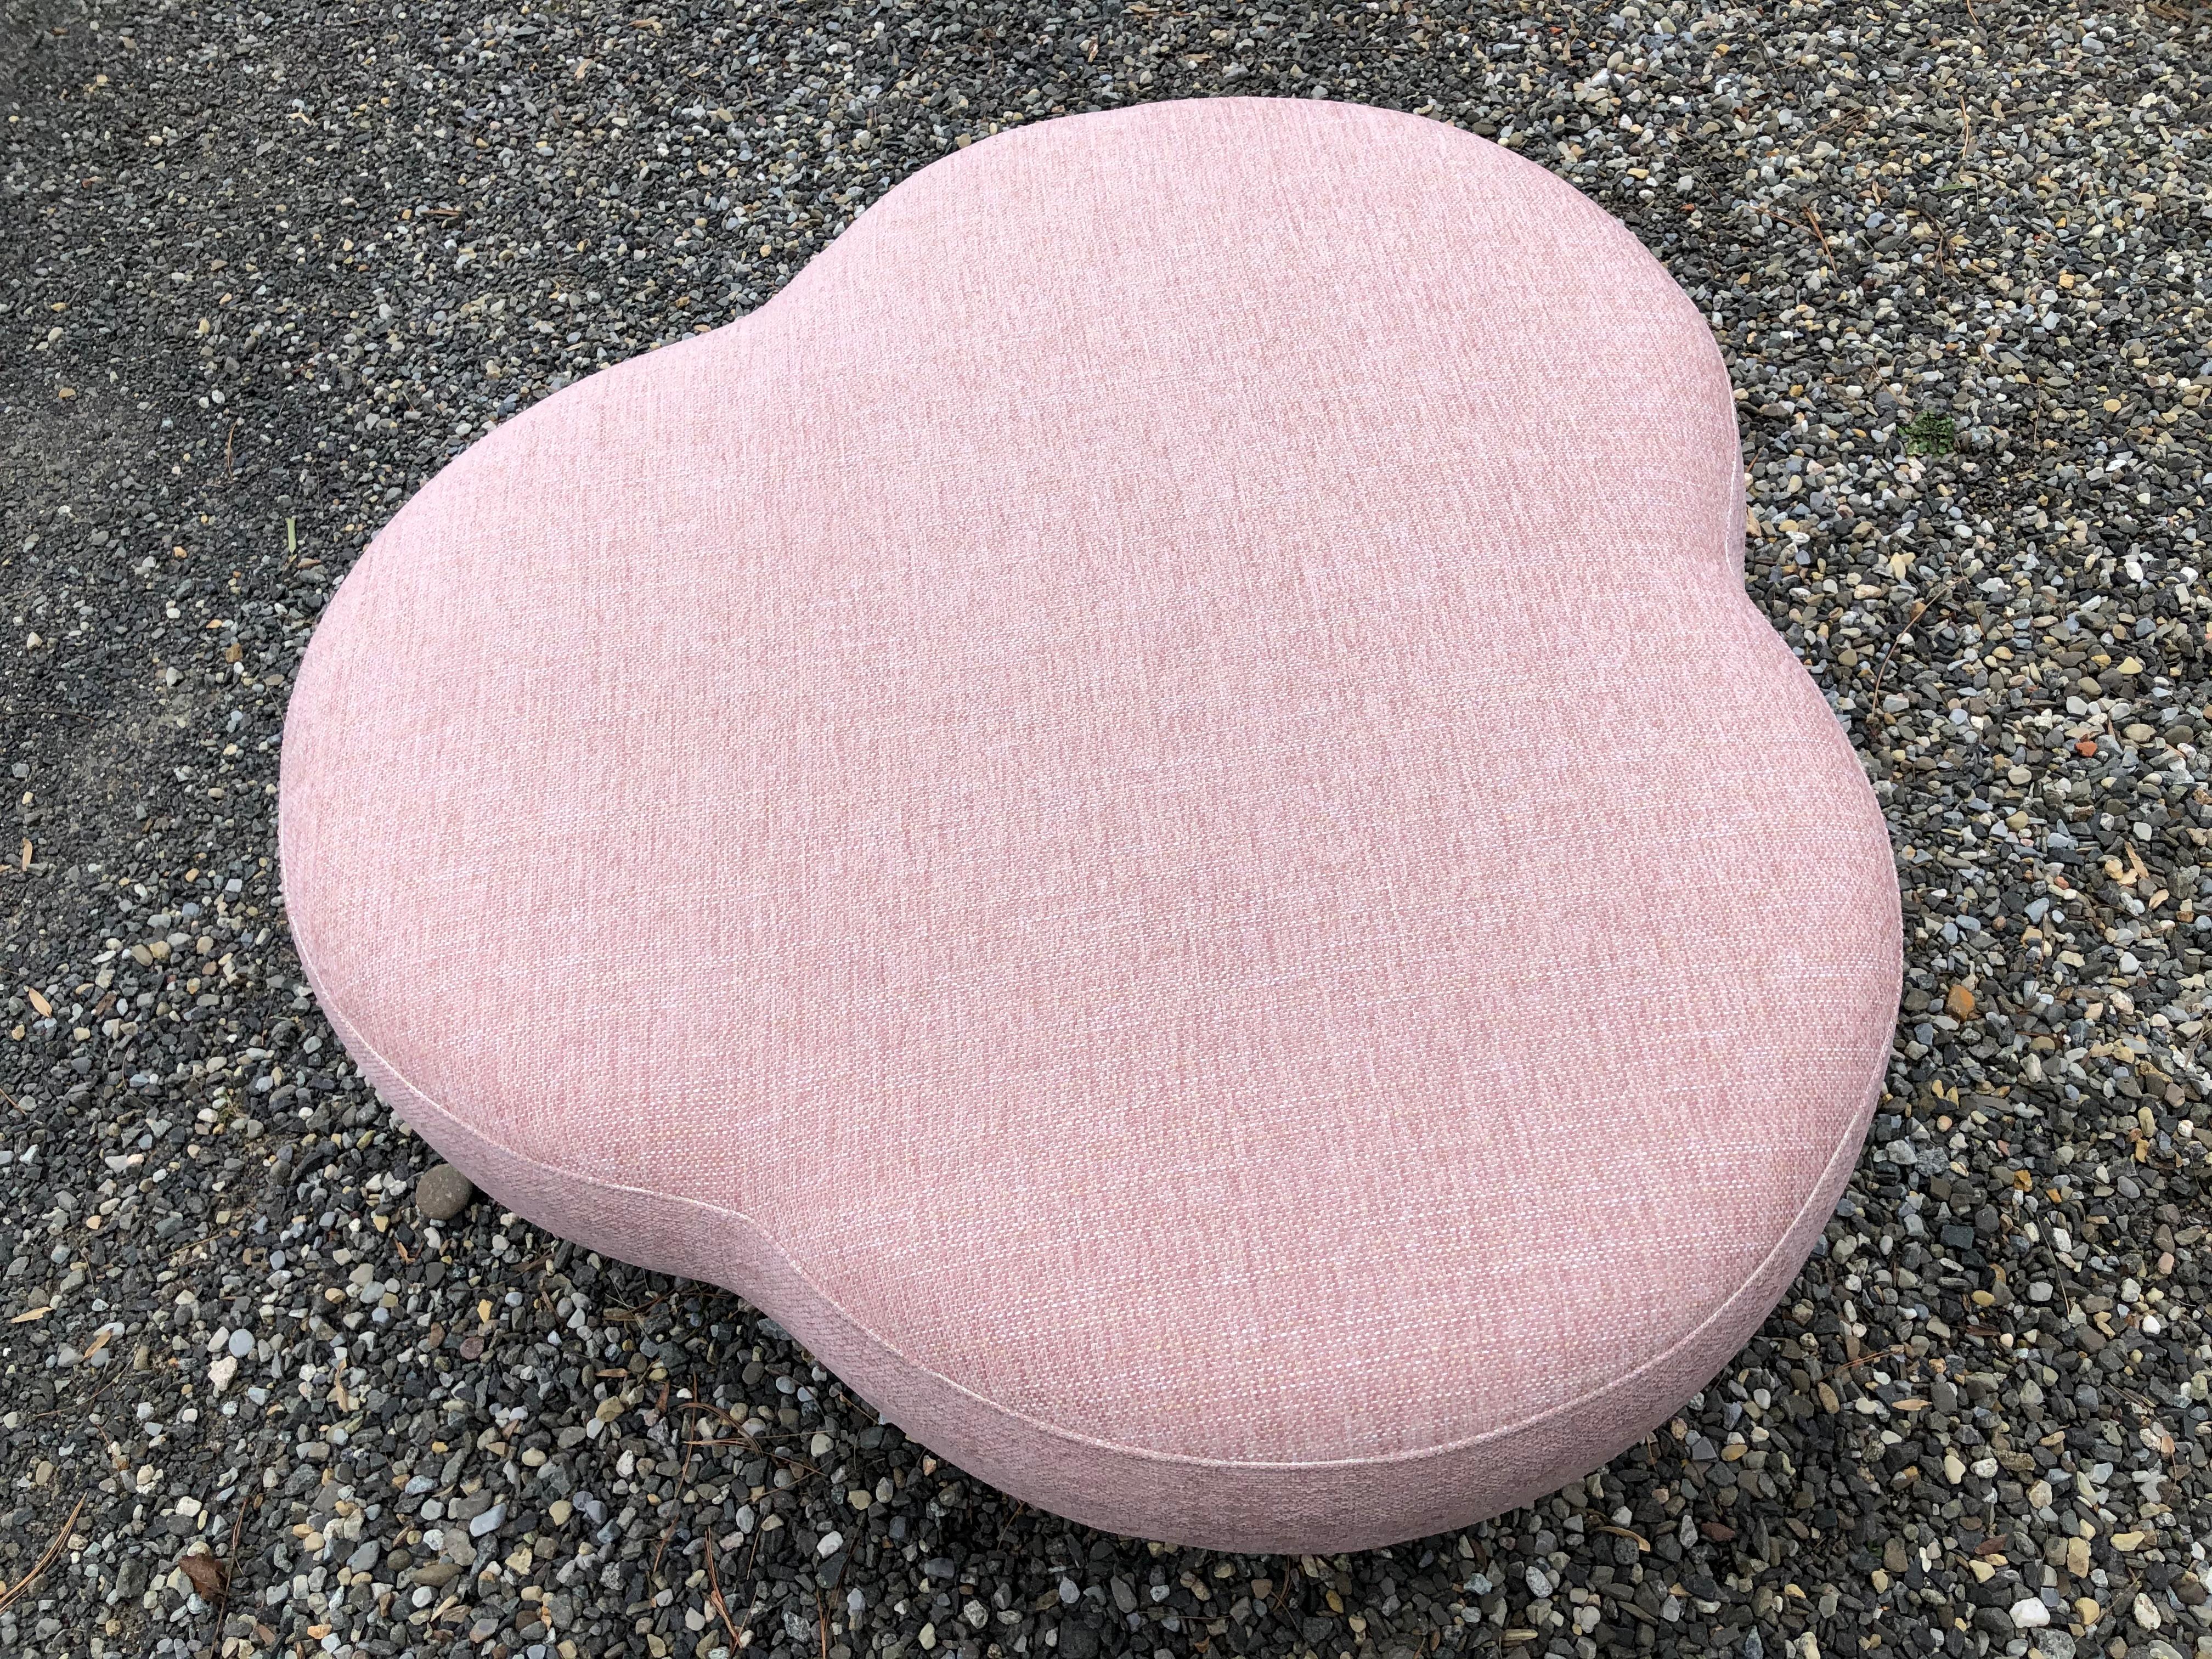 Glamorous vintage trefoil ottoman pouf newly upholstered in a pale pink blush linen with gilt legs. This piece is the perfect addition to a dressing room, bath or bedroom. The clean lines of this piece make it appropriate in both a modern or